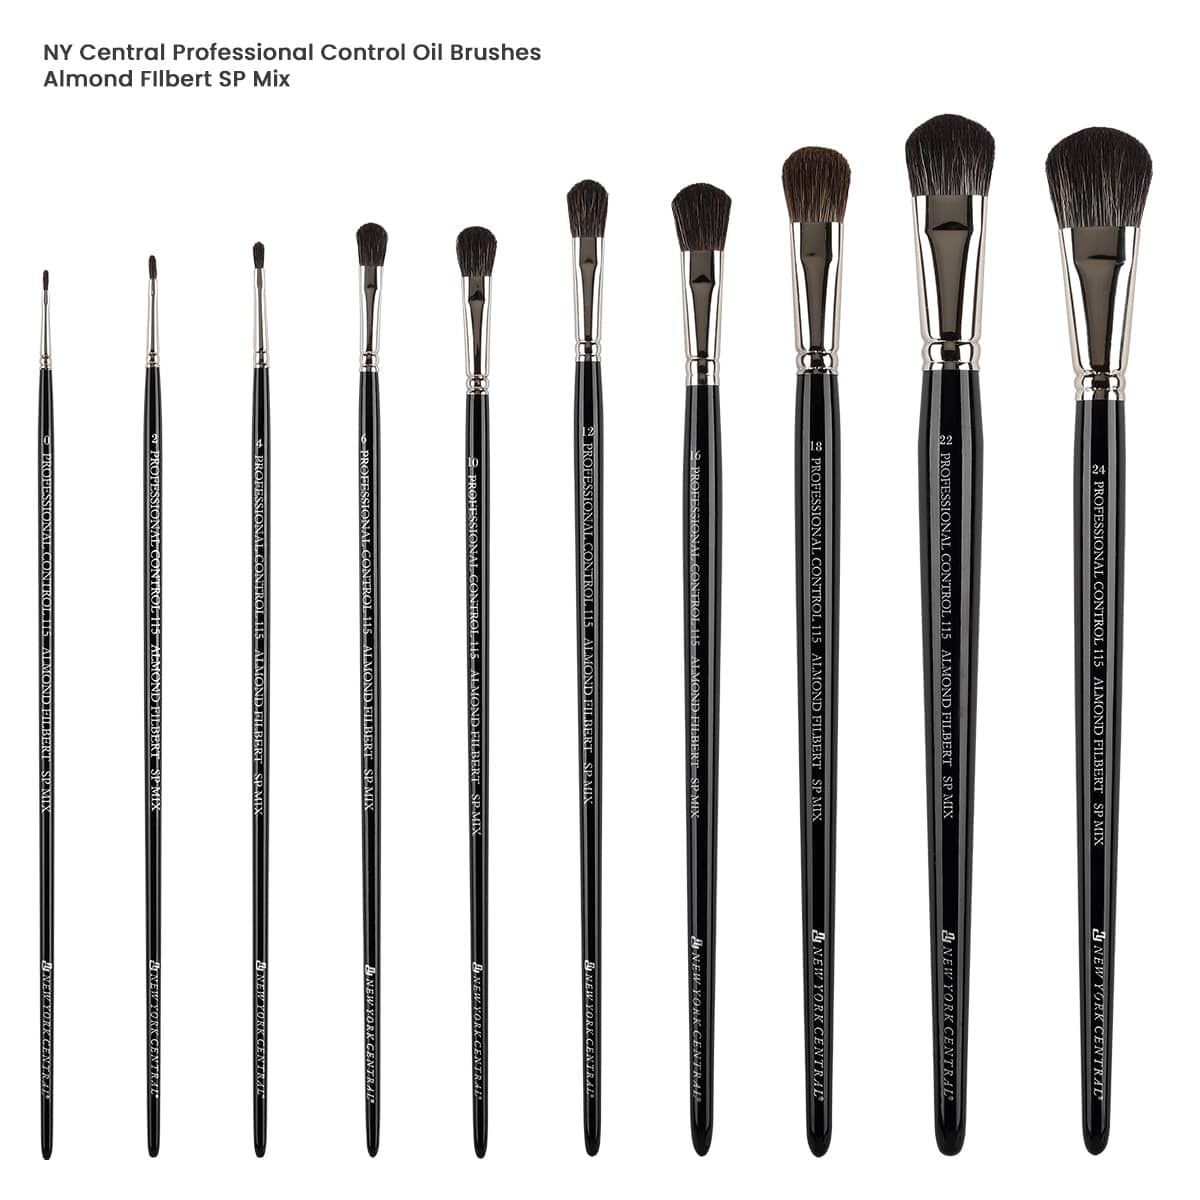 NY Central Pro Control Almond Filbert SP Mix Brushes